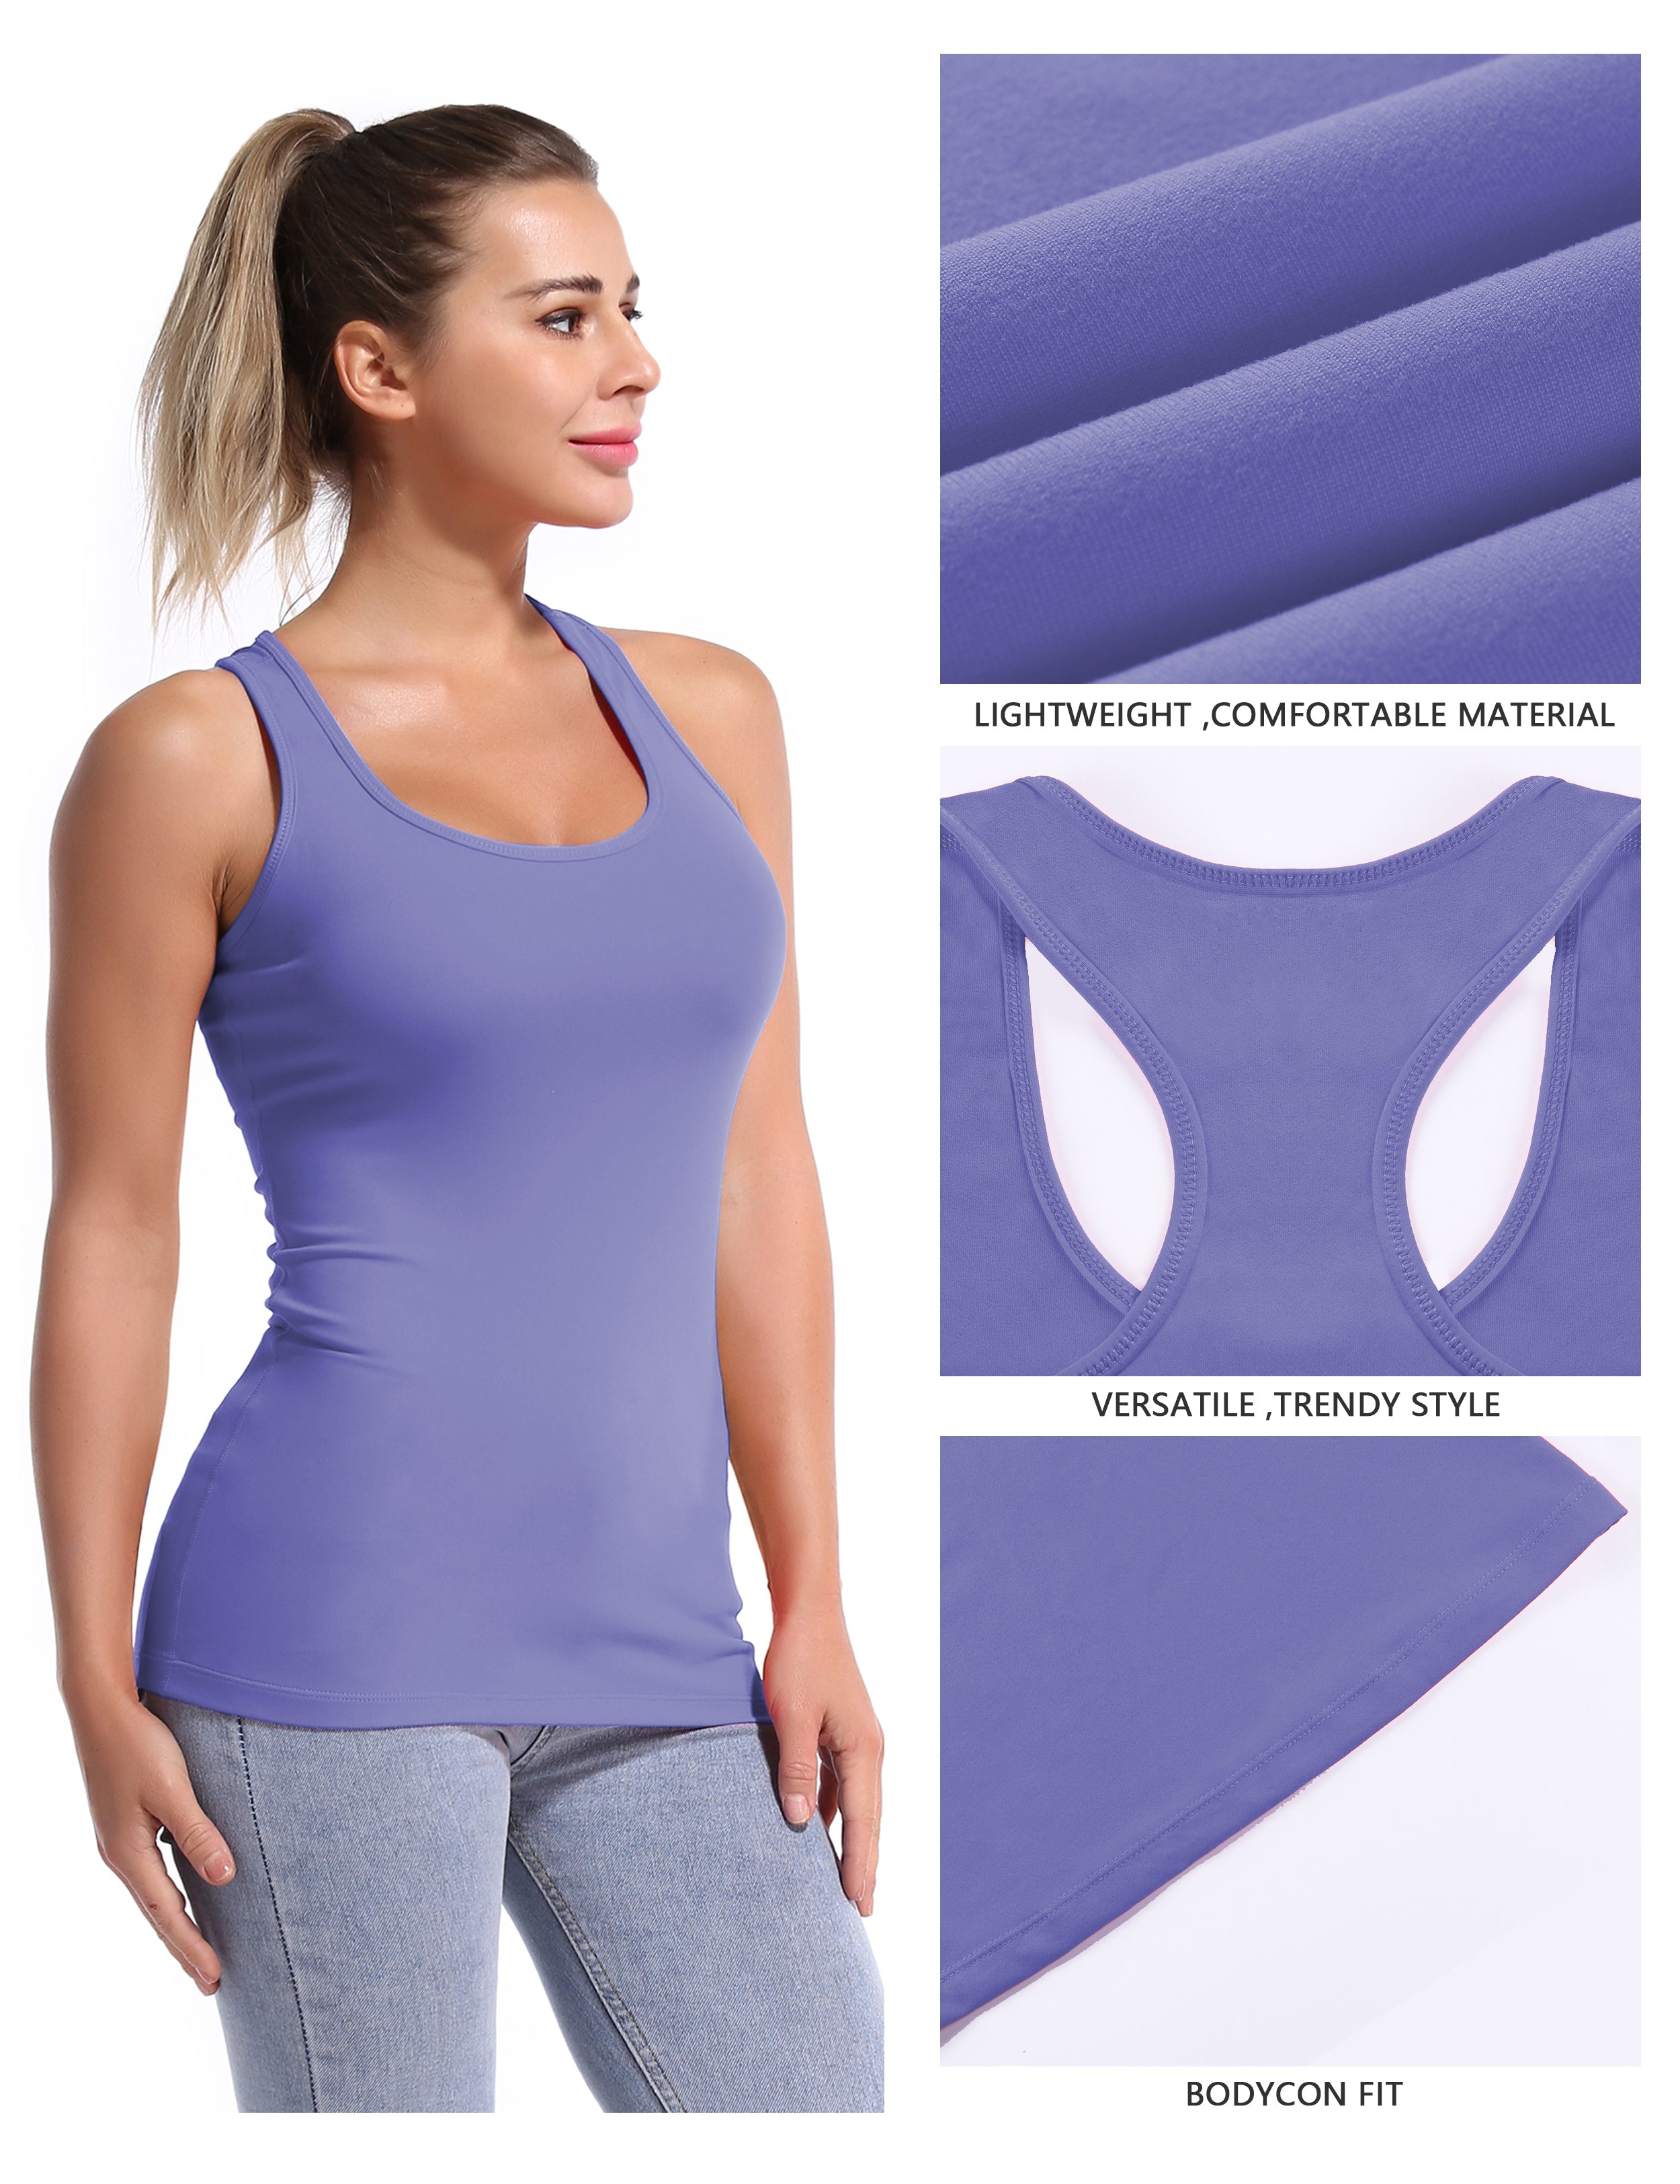 Racerback Athletic Tank Tops lavender 92%Nylon/8%Spandex(Cotton Soft) Designed for Pilates Tight Fit So buttery soft, it feels weightless Sweat-wicking Four-way stretch Breathable Contours your body Sits below the waistband for moderate, everyday coverage